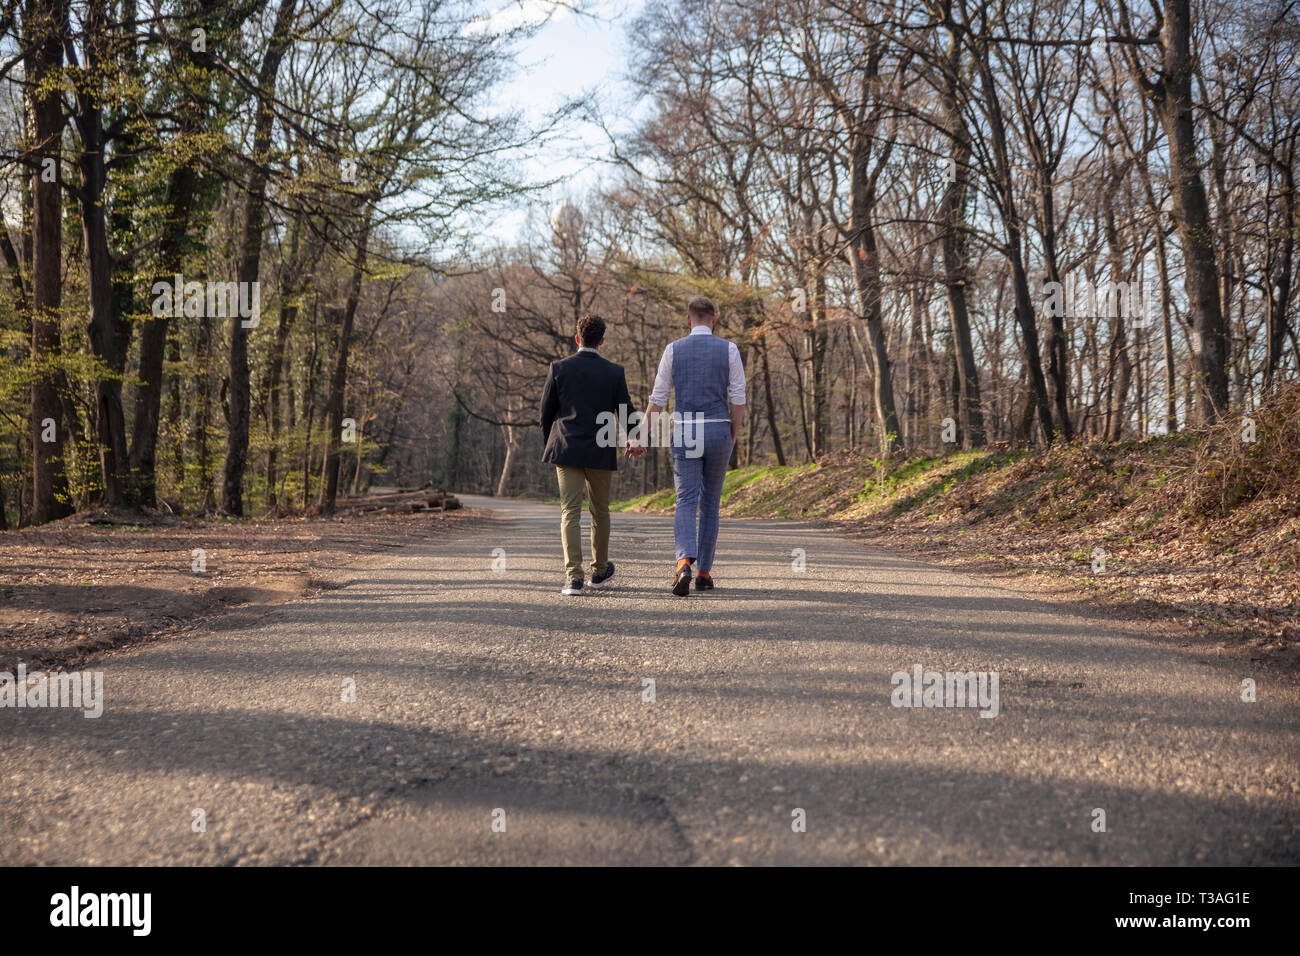 rear view, two gay man walking in forest, on asphalt road. Together holding hands. Their puppy dog walking with them too close by. Stock Photo